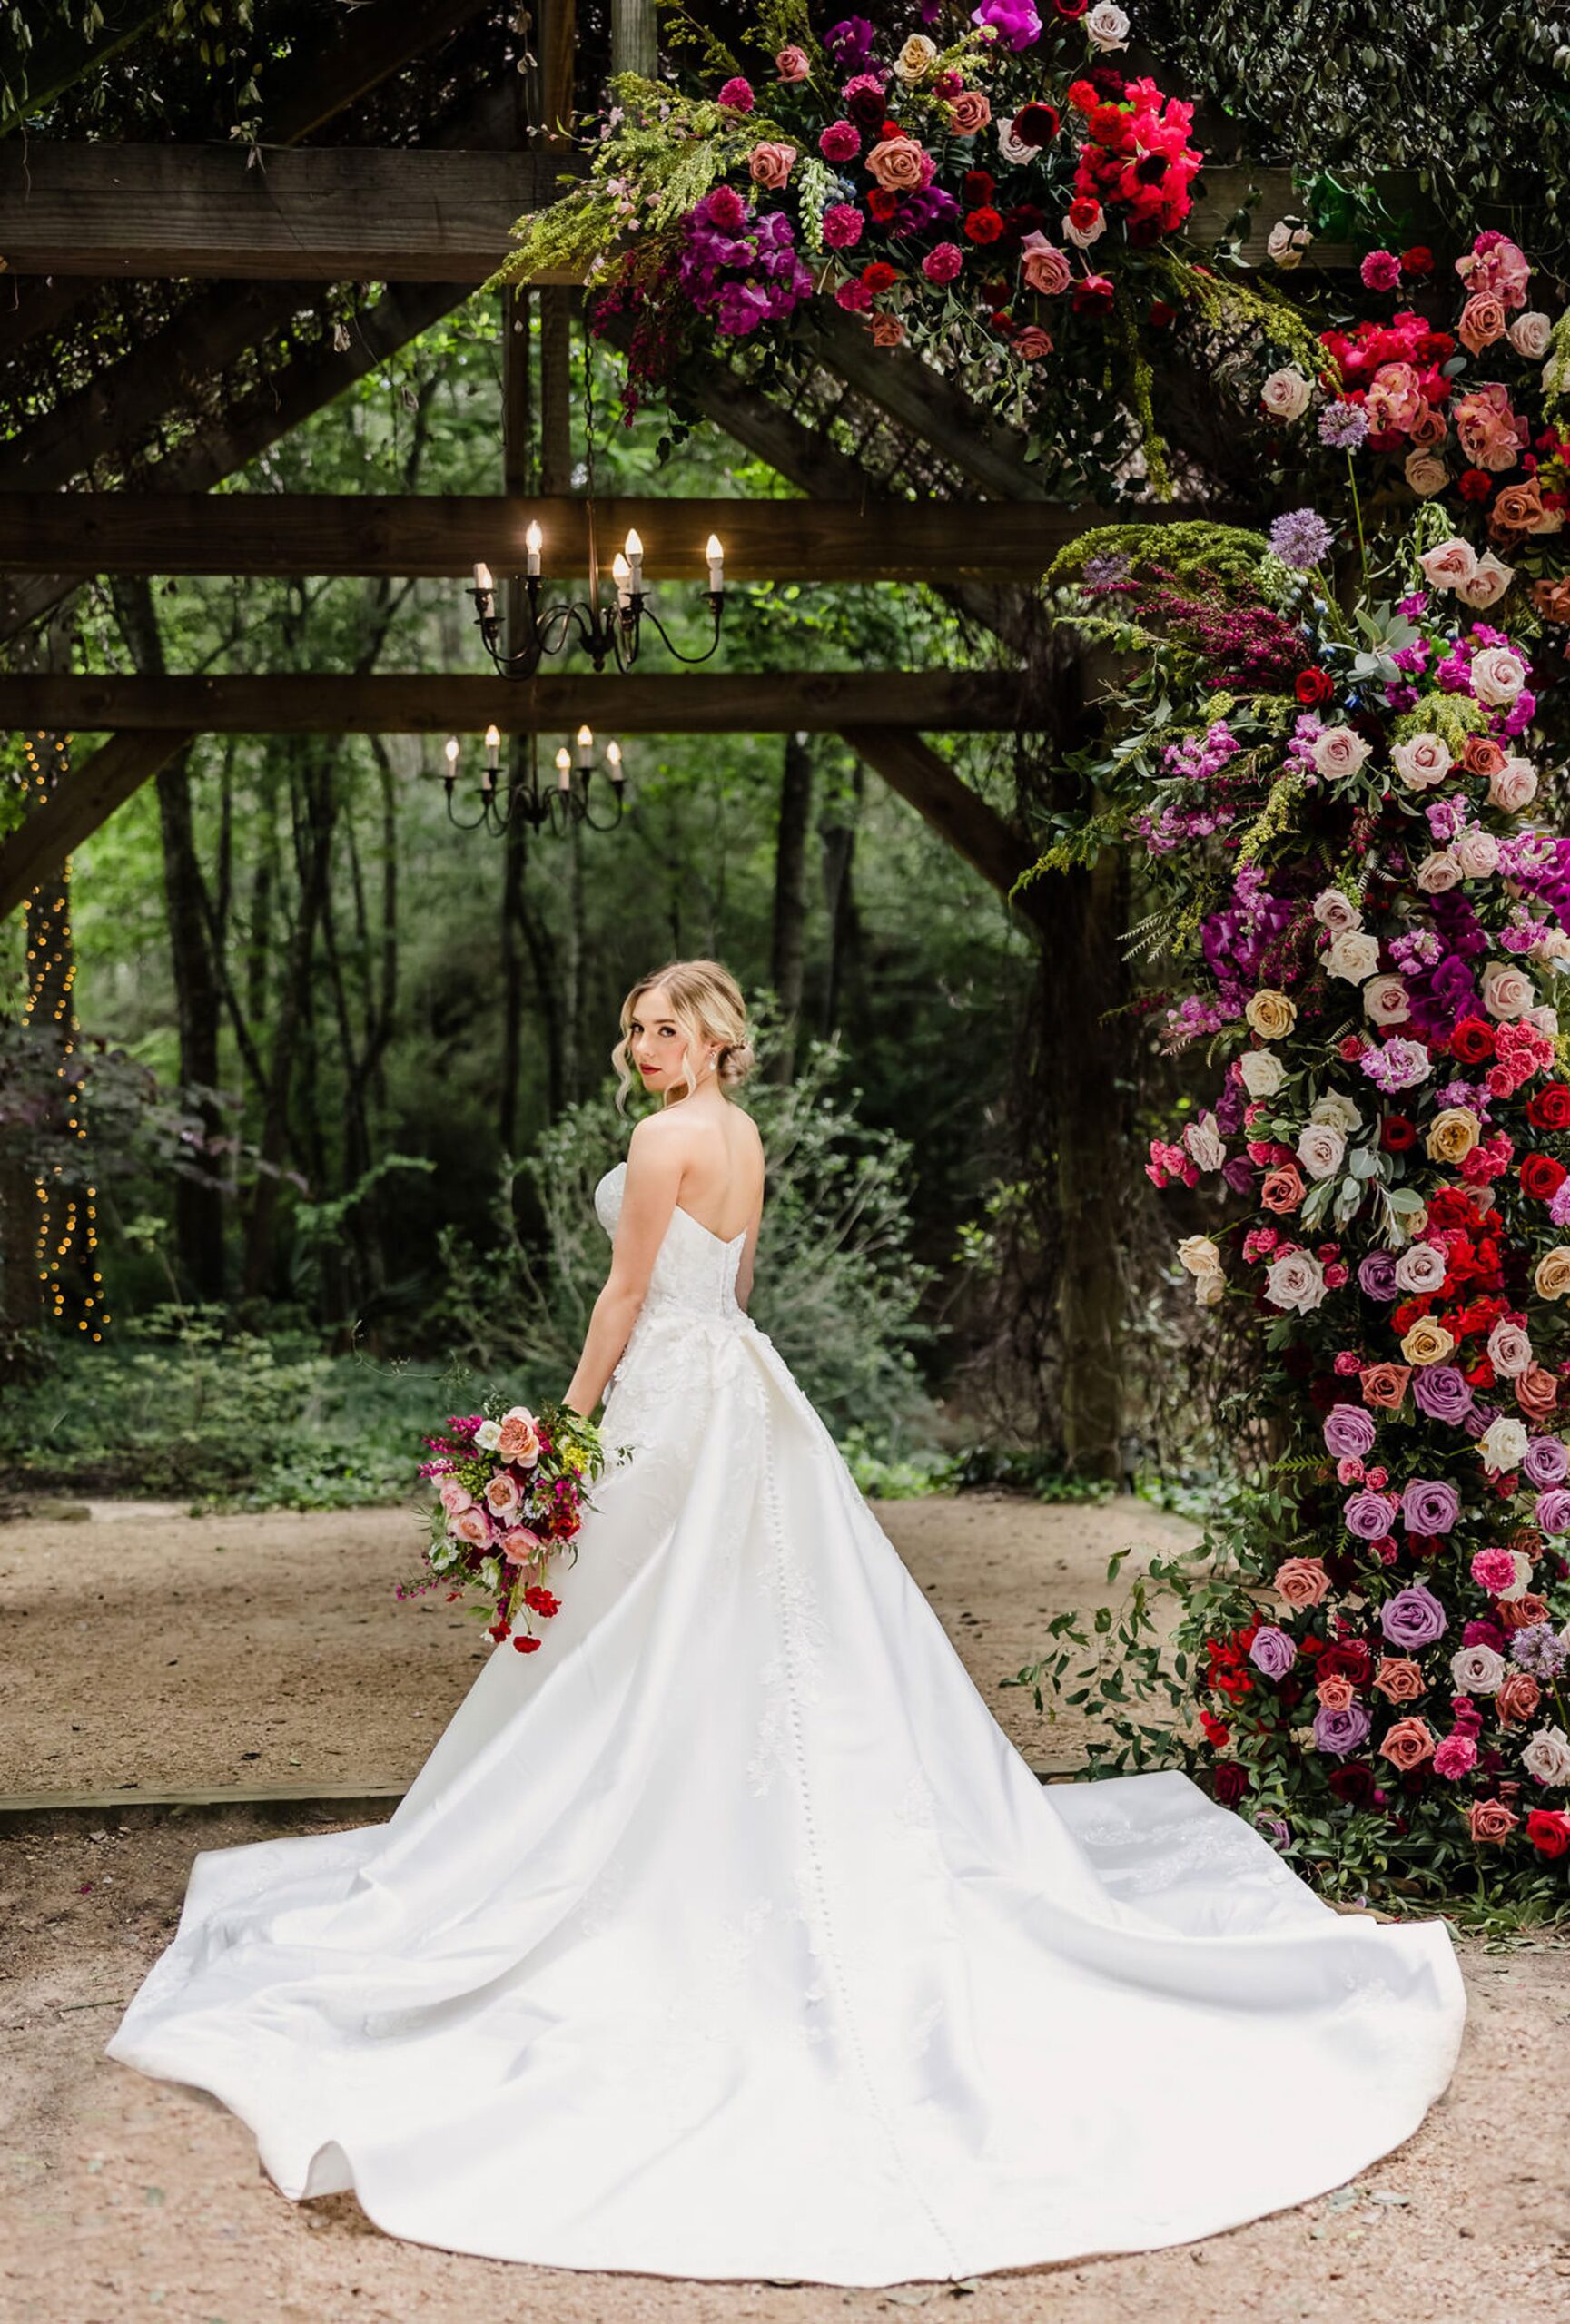 Bridal portrait at the Big Sky Barn in Montgomery, Texas.